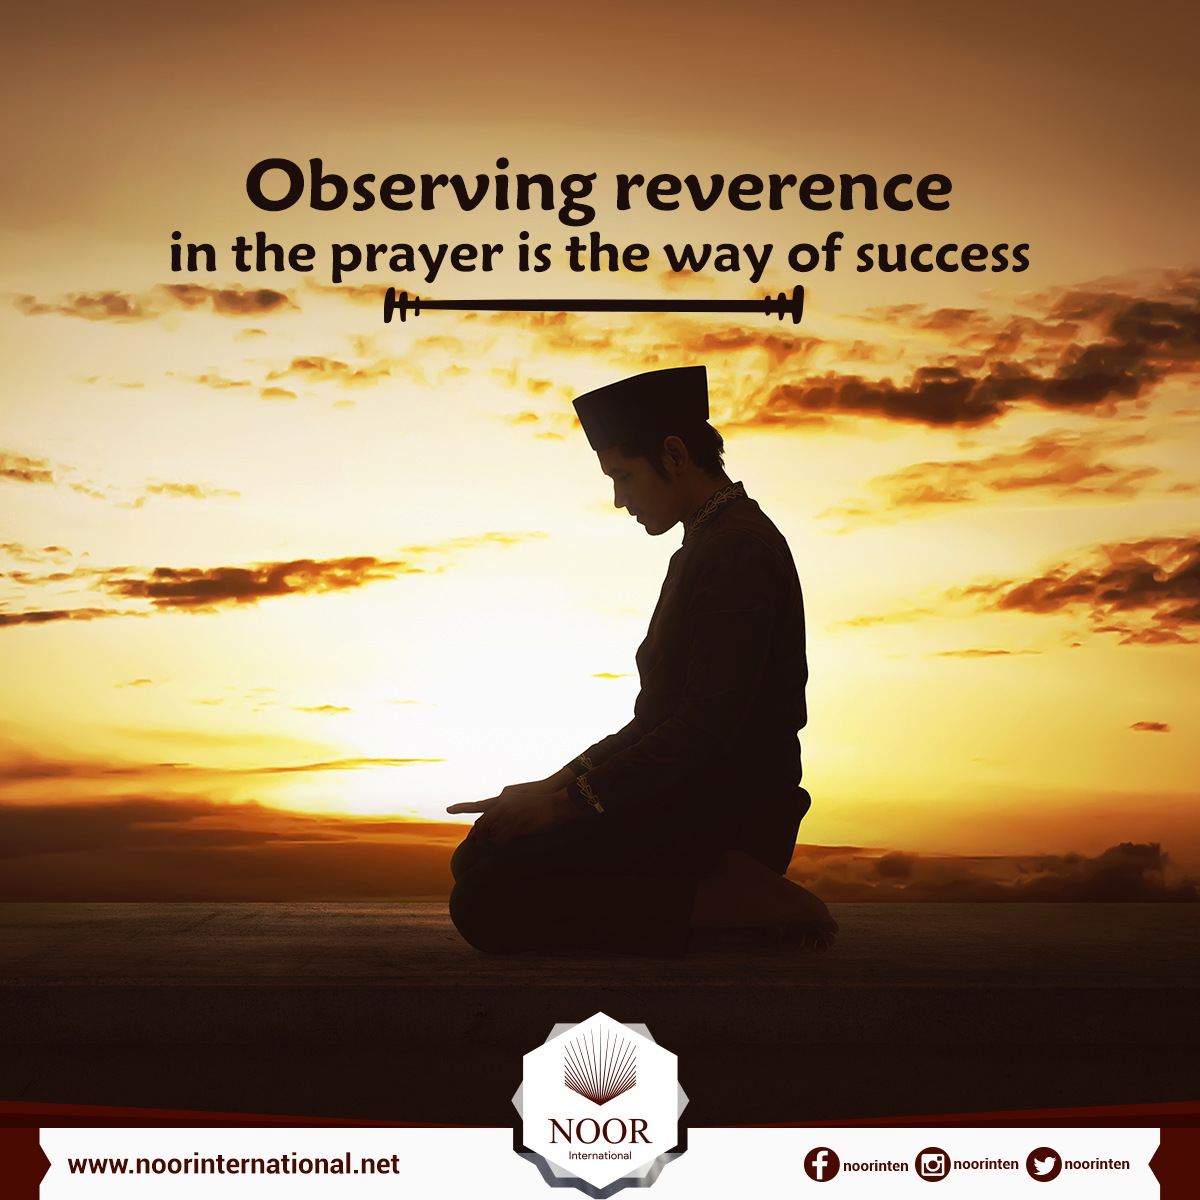 Observing reverence in the prayer is the way of success